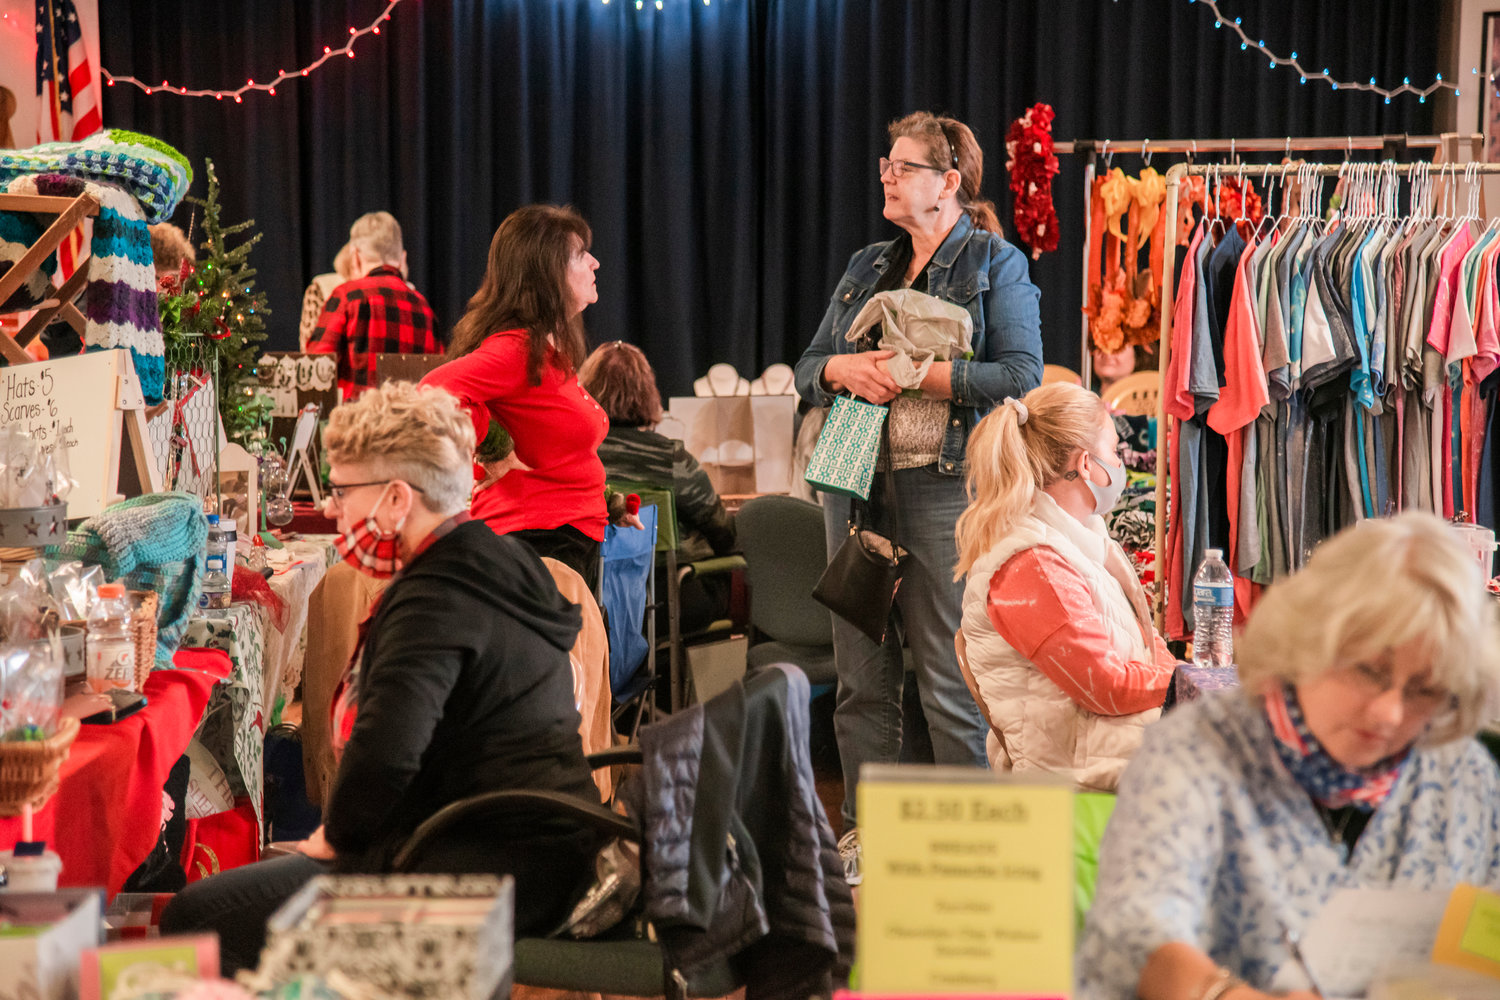 Attendees of a Fall Bazaar mingle around tables and display racks Saturday afternoon in Adna.